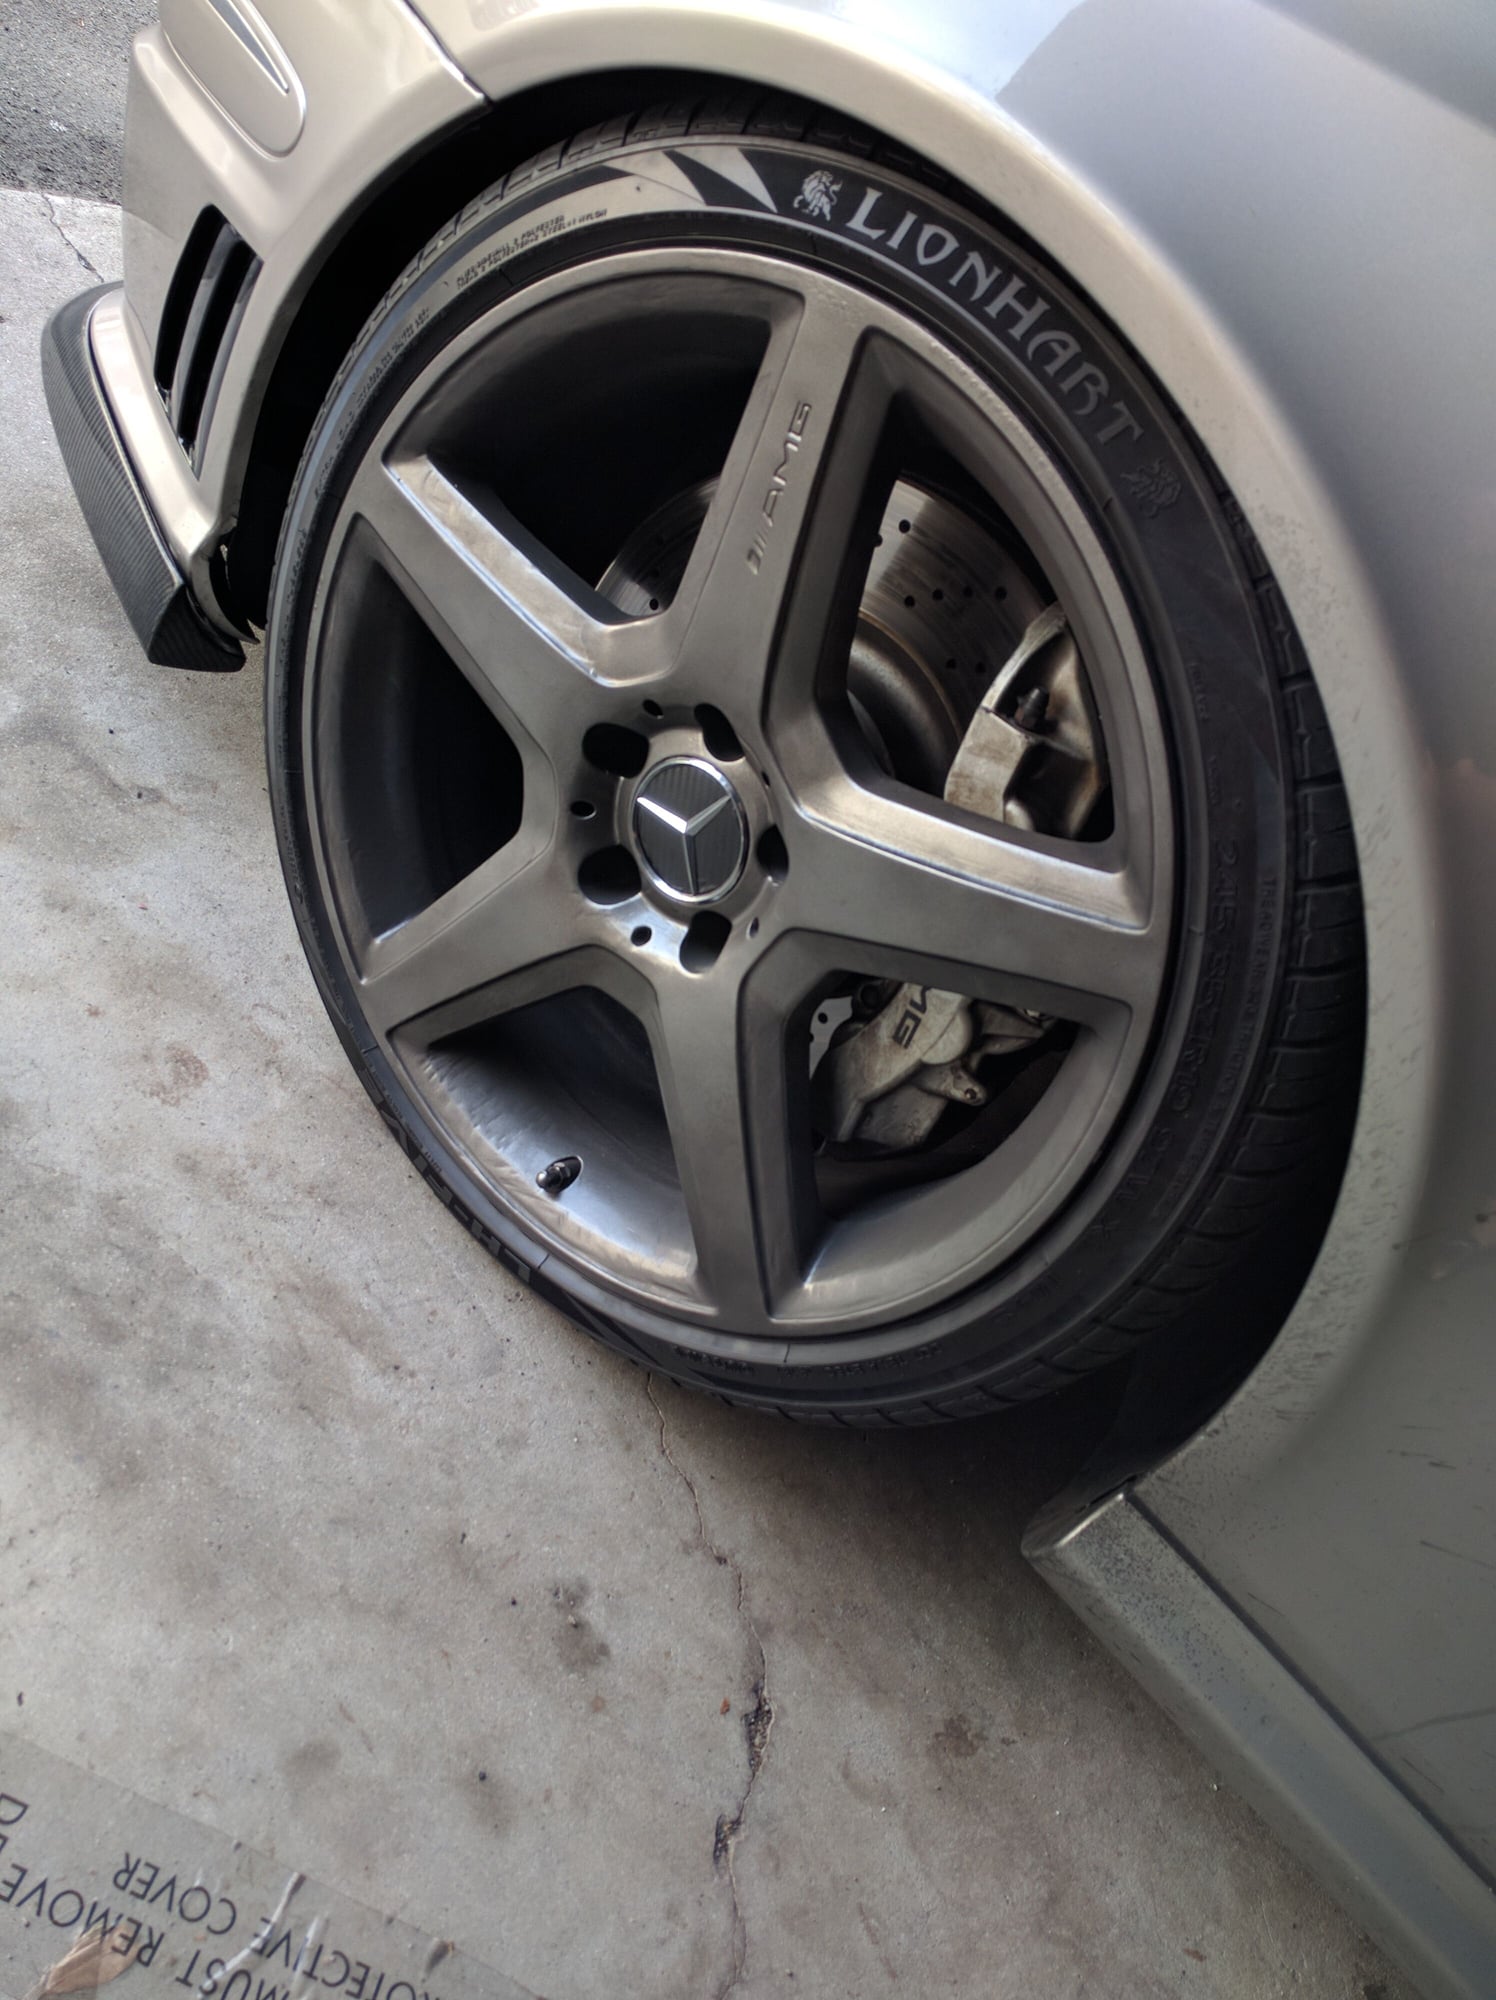 Wheels and Tires/Axles - W219 CLS55 AMG Wheels - Used - 2003 to 2006 Mercedes-Benz E55 AMG - 2007 to 2009 Mercedes-Benz CLS55 AMG - 2007 to 2009 Mercedes-Benz E63 AMG - 2003 to 2006 Mercedes-Benz E500 - Cerritos, CA 90703, United States